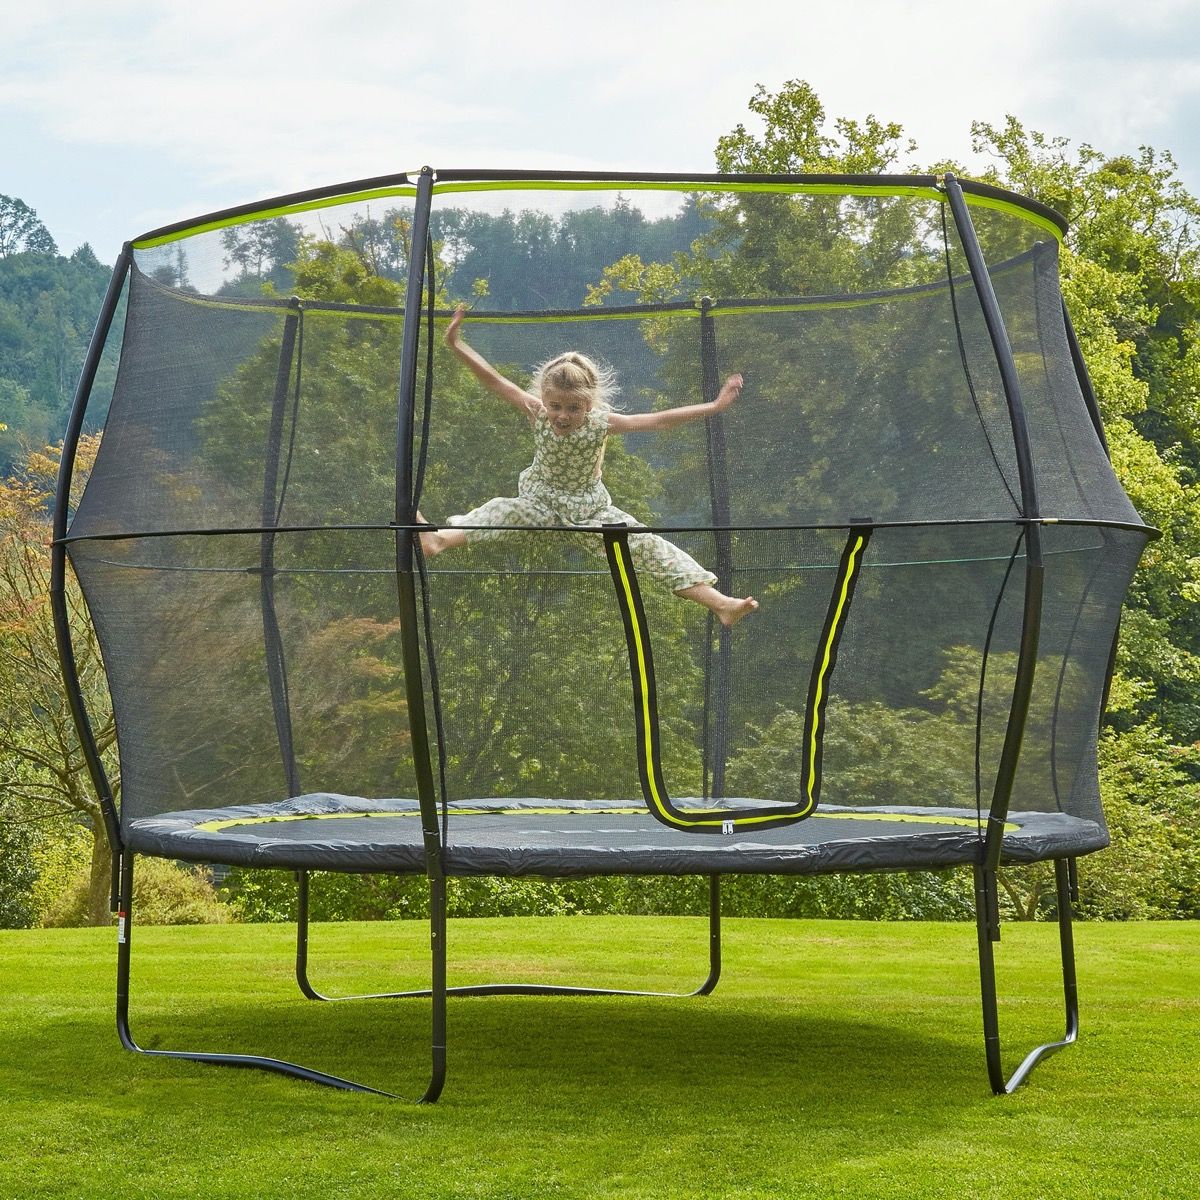 Rebo 12FT Base Jump Trampoline With Halo II Enclosure